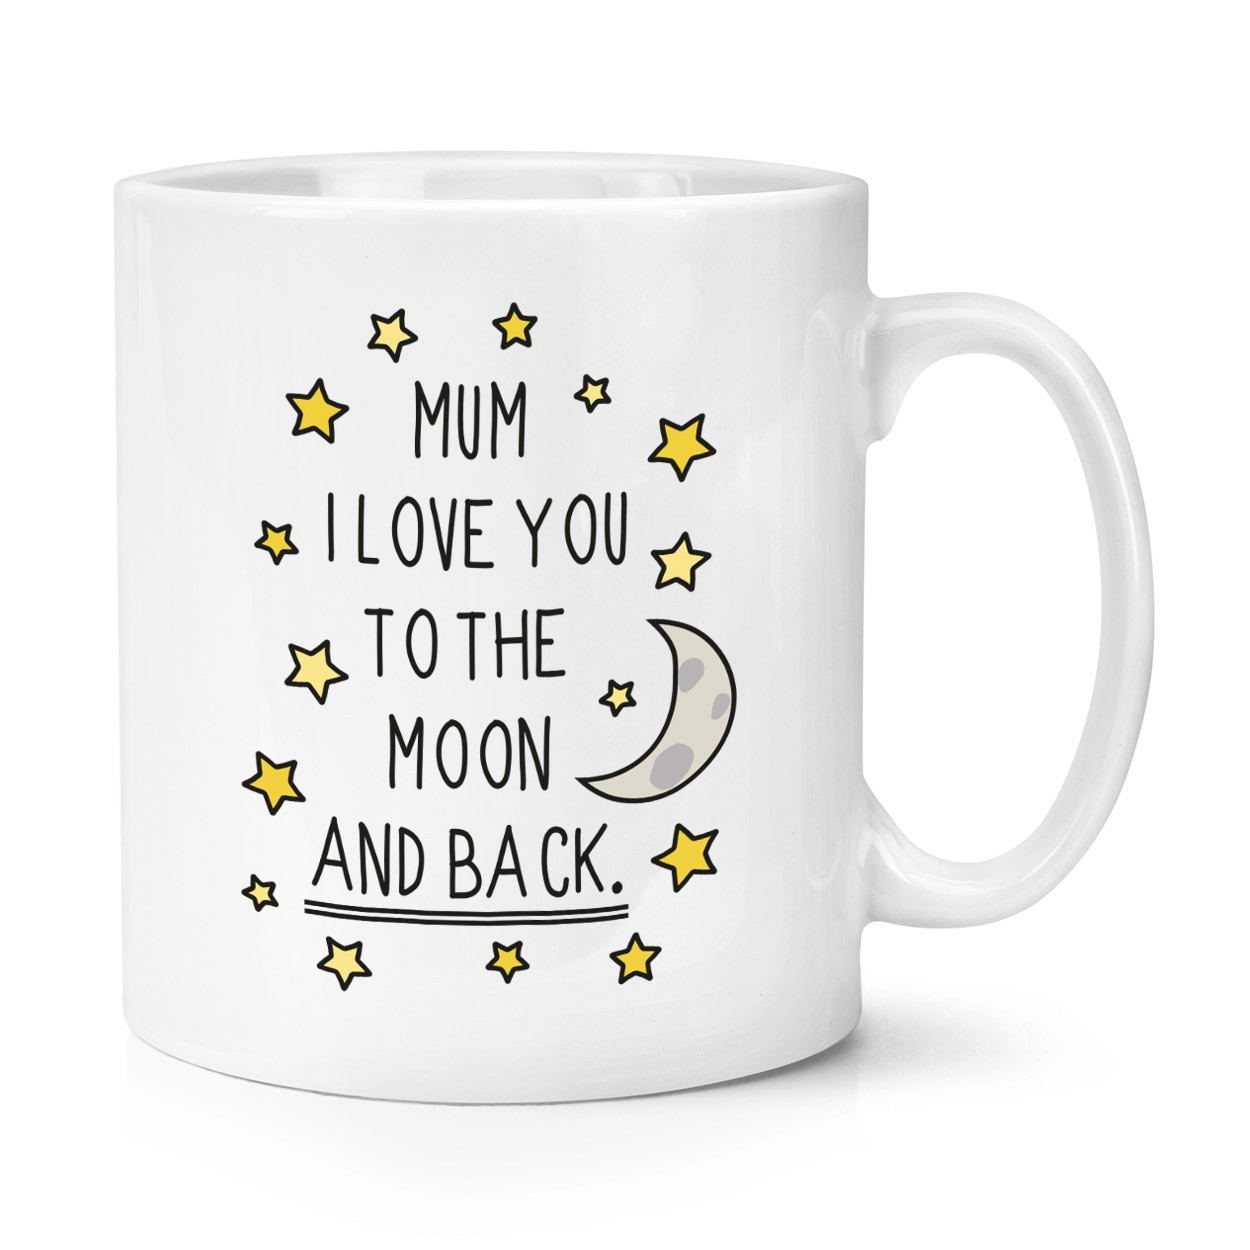 Mum I Love You To The Moon And Back 10oz Mug Cup 